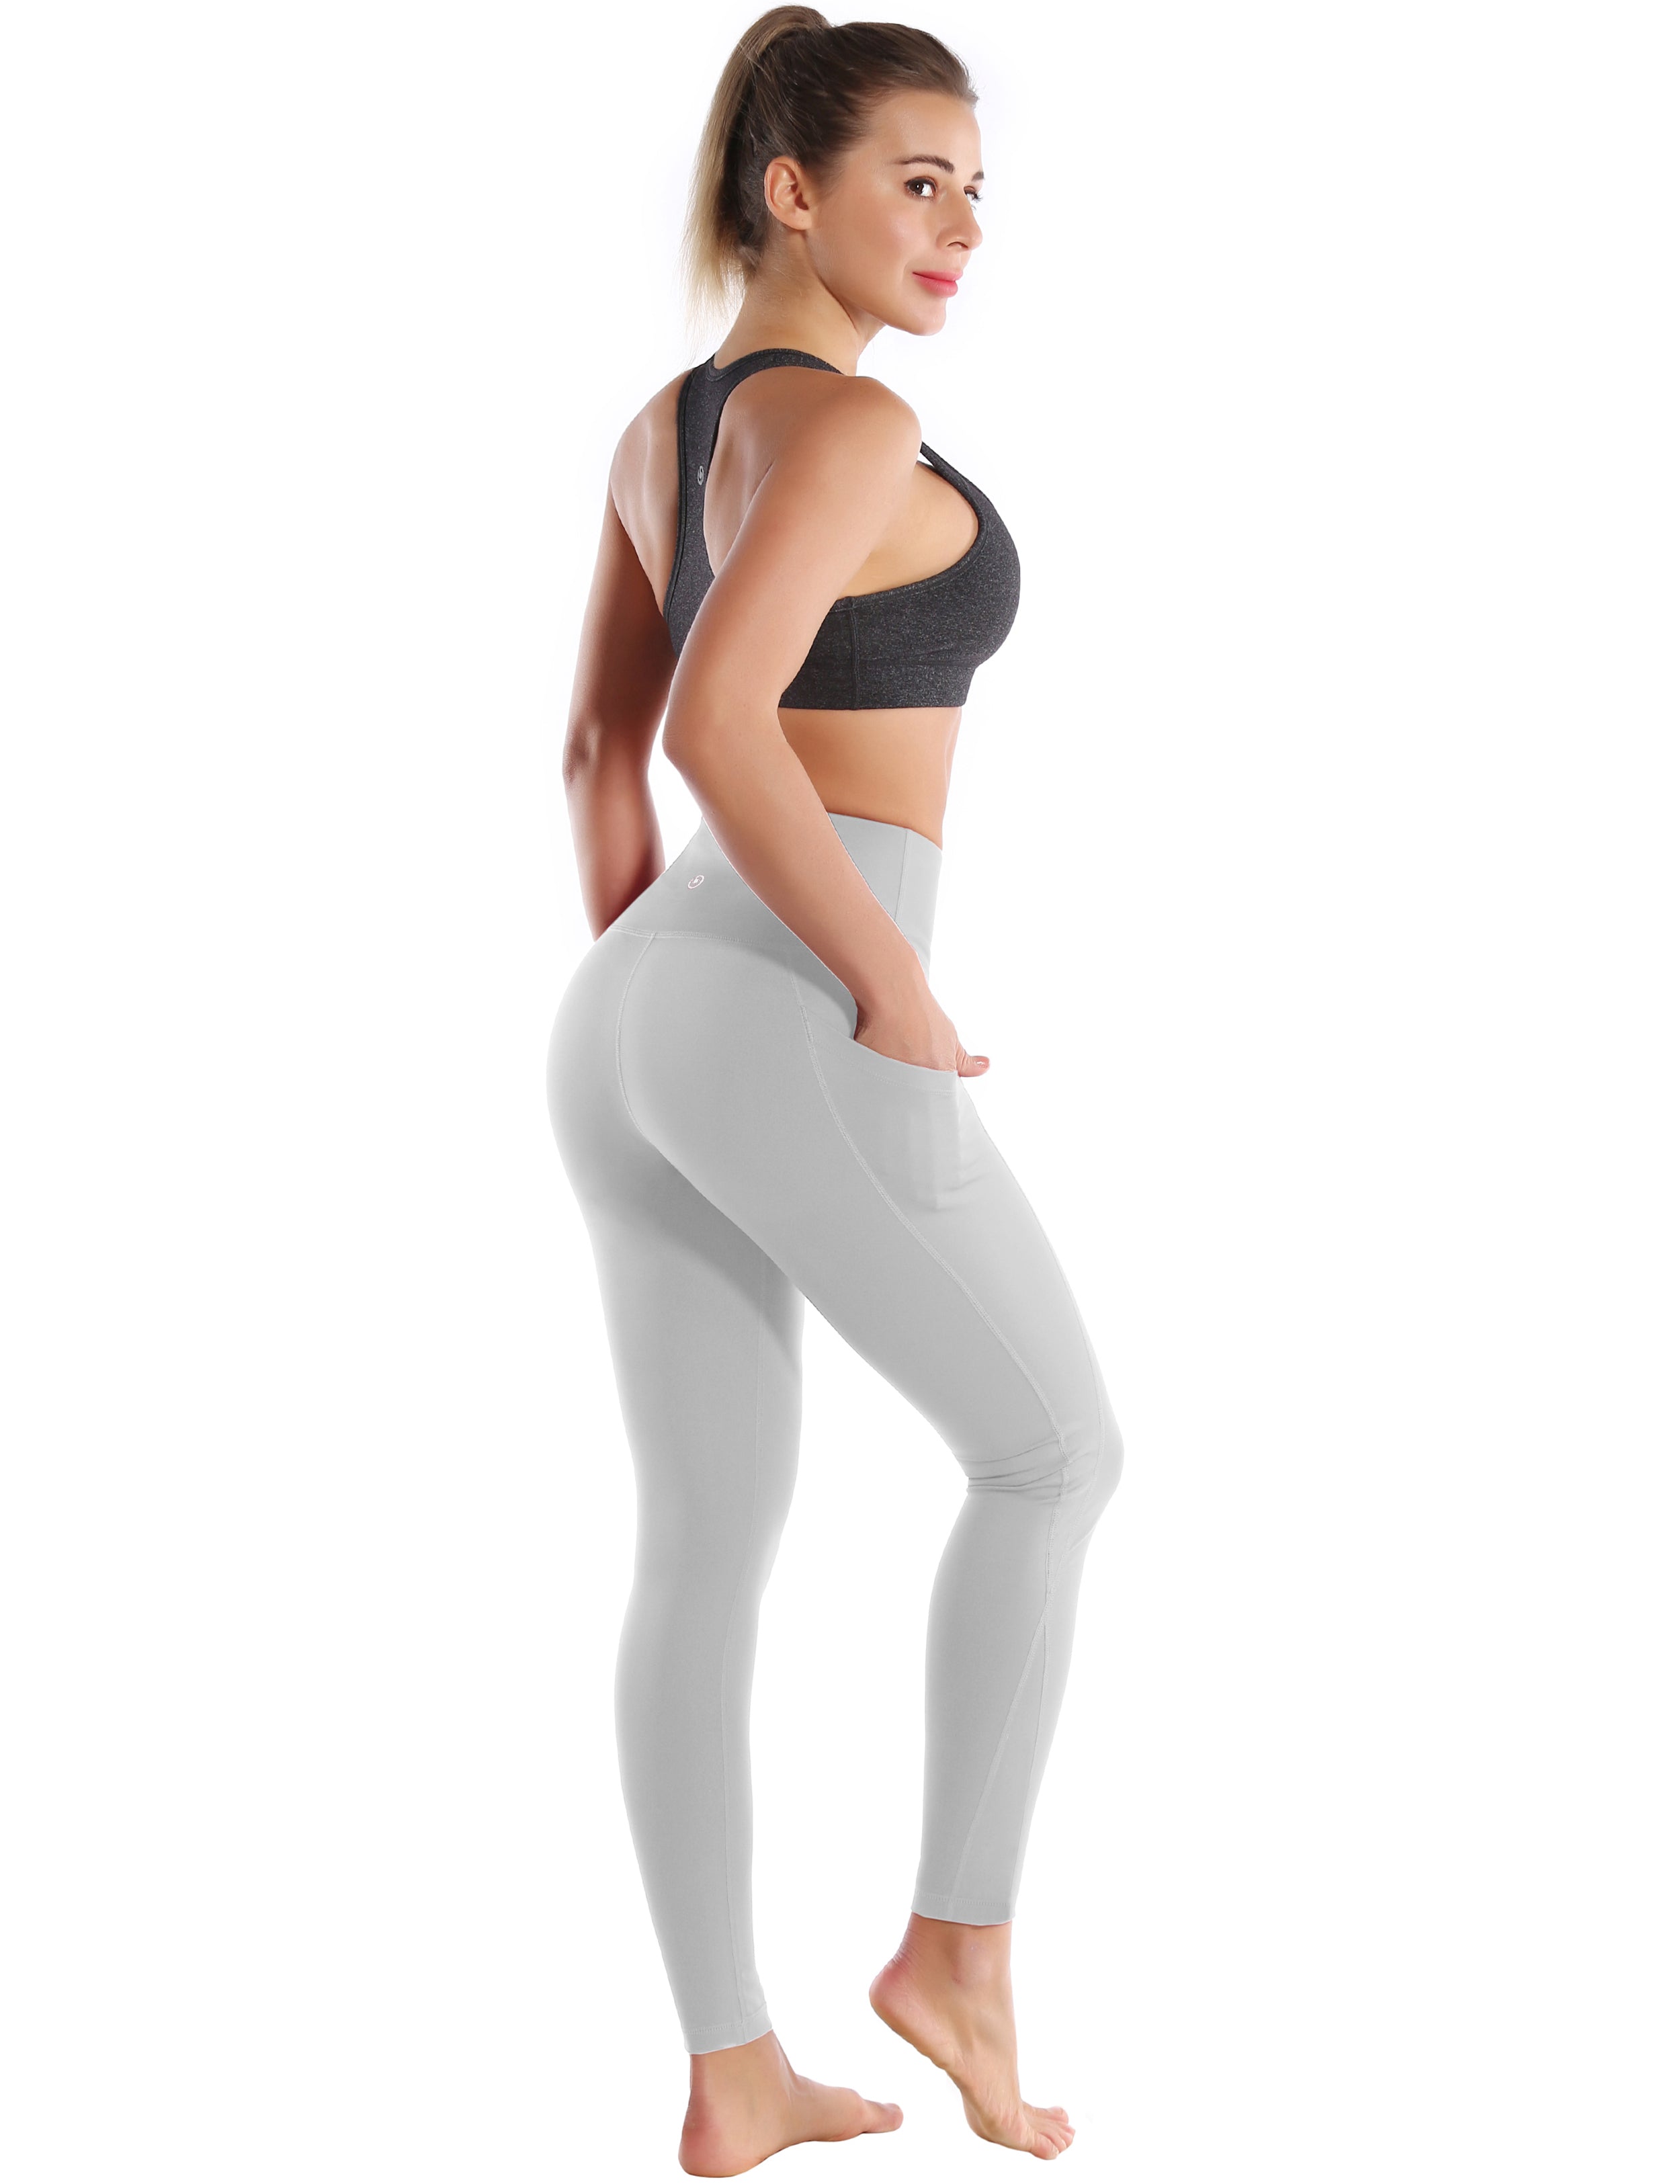 High Waist Side Pockets Running Pants lightgray 75% Nylon, 25% Spandex Fabric doesn't attract lint easily 4-way stretch No see-through Moisture-wicking Tummy control Inner pocket